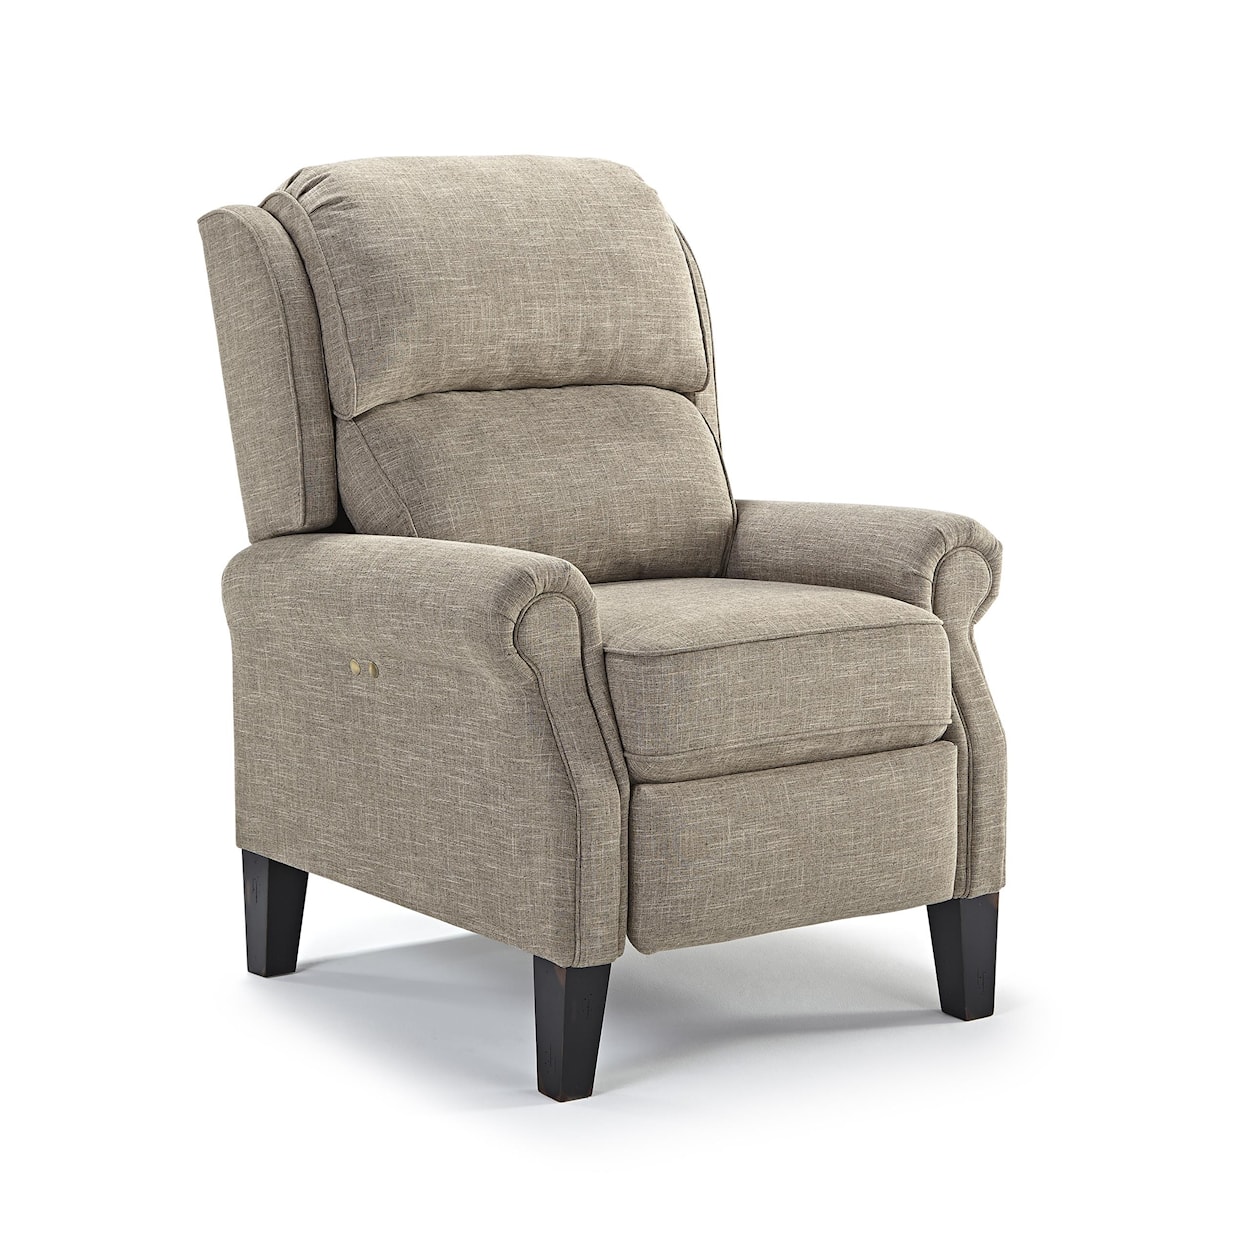 Best Home Furnishings Joanna 0l20 Joanna Push Back Recliner With Rolled